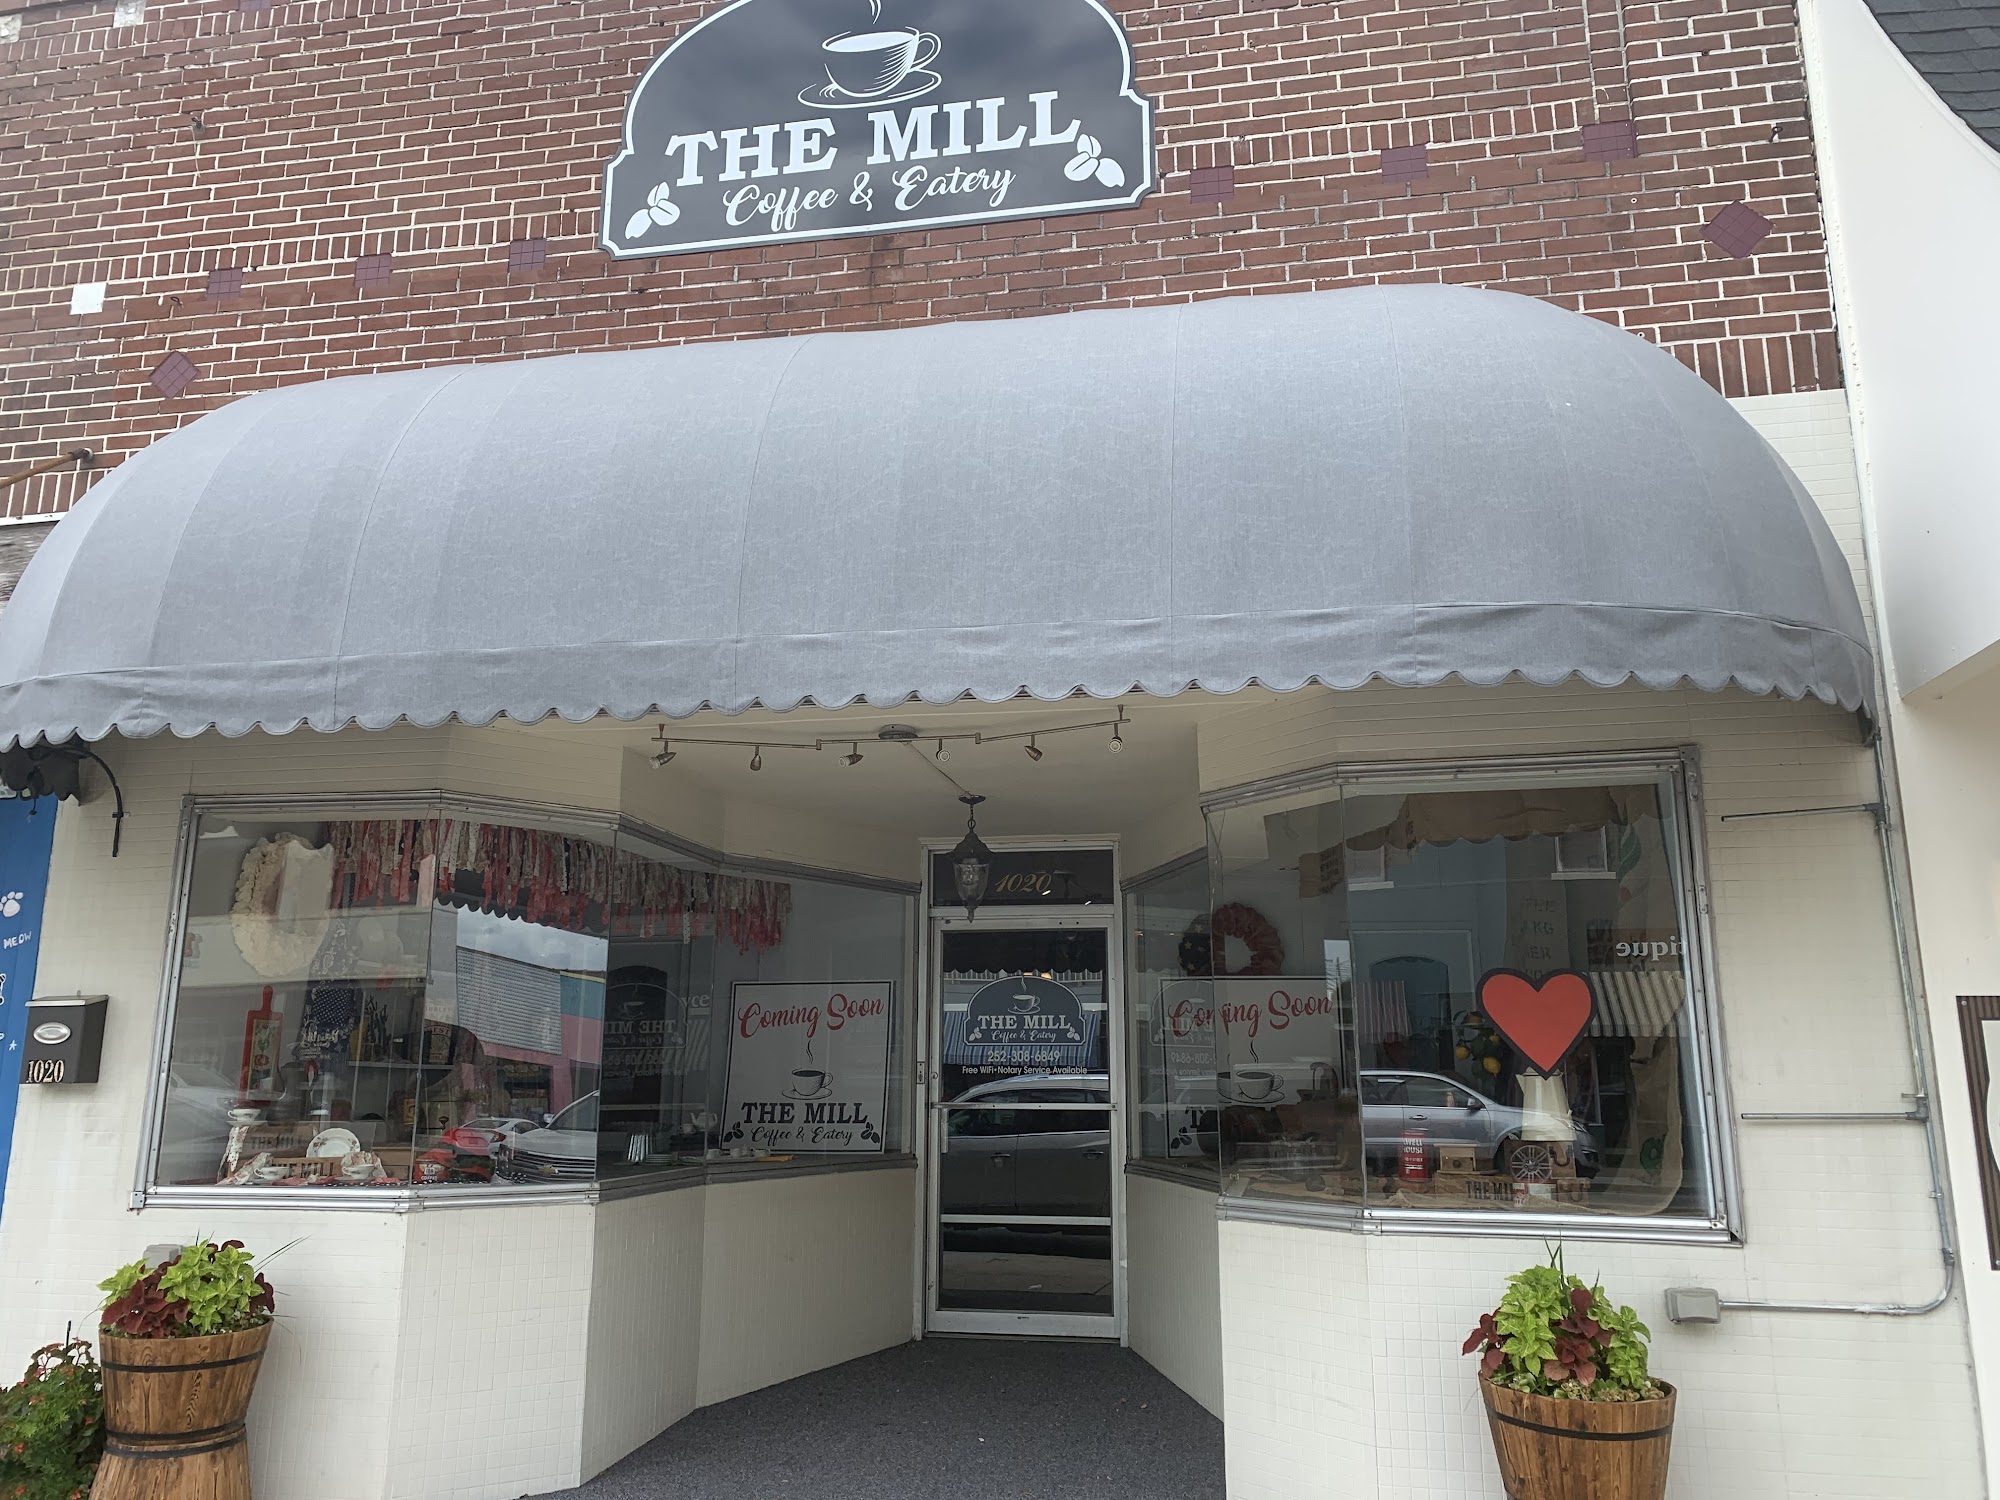 The Mill Coffee and Eatery